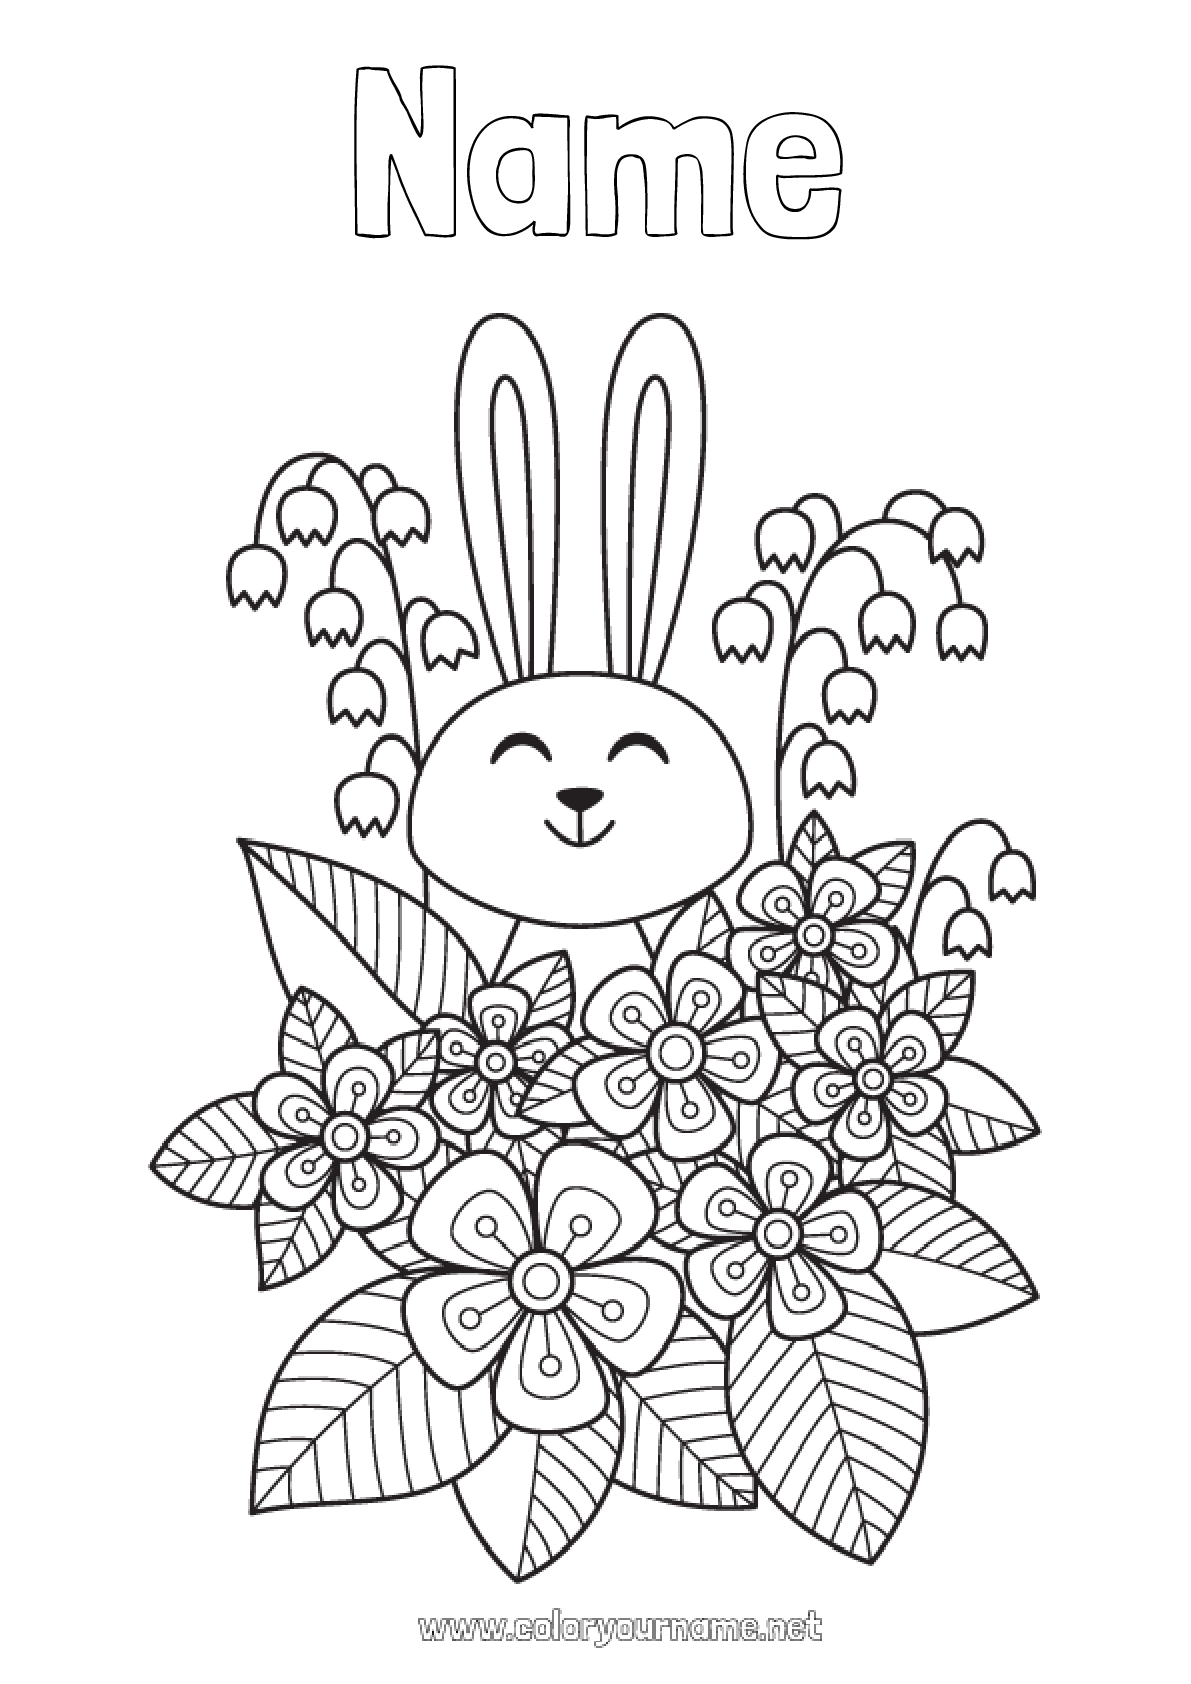 Coloring page No.1222 - Flowers Spring Bunny